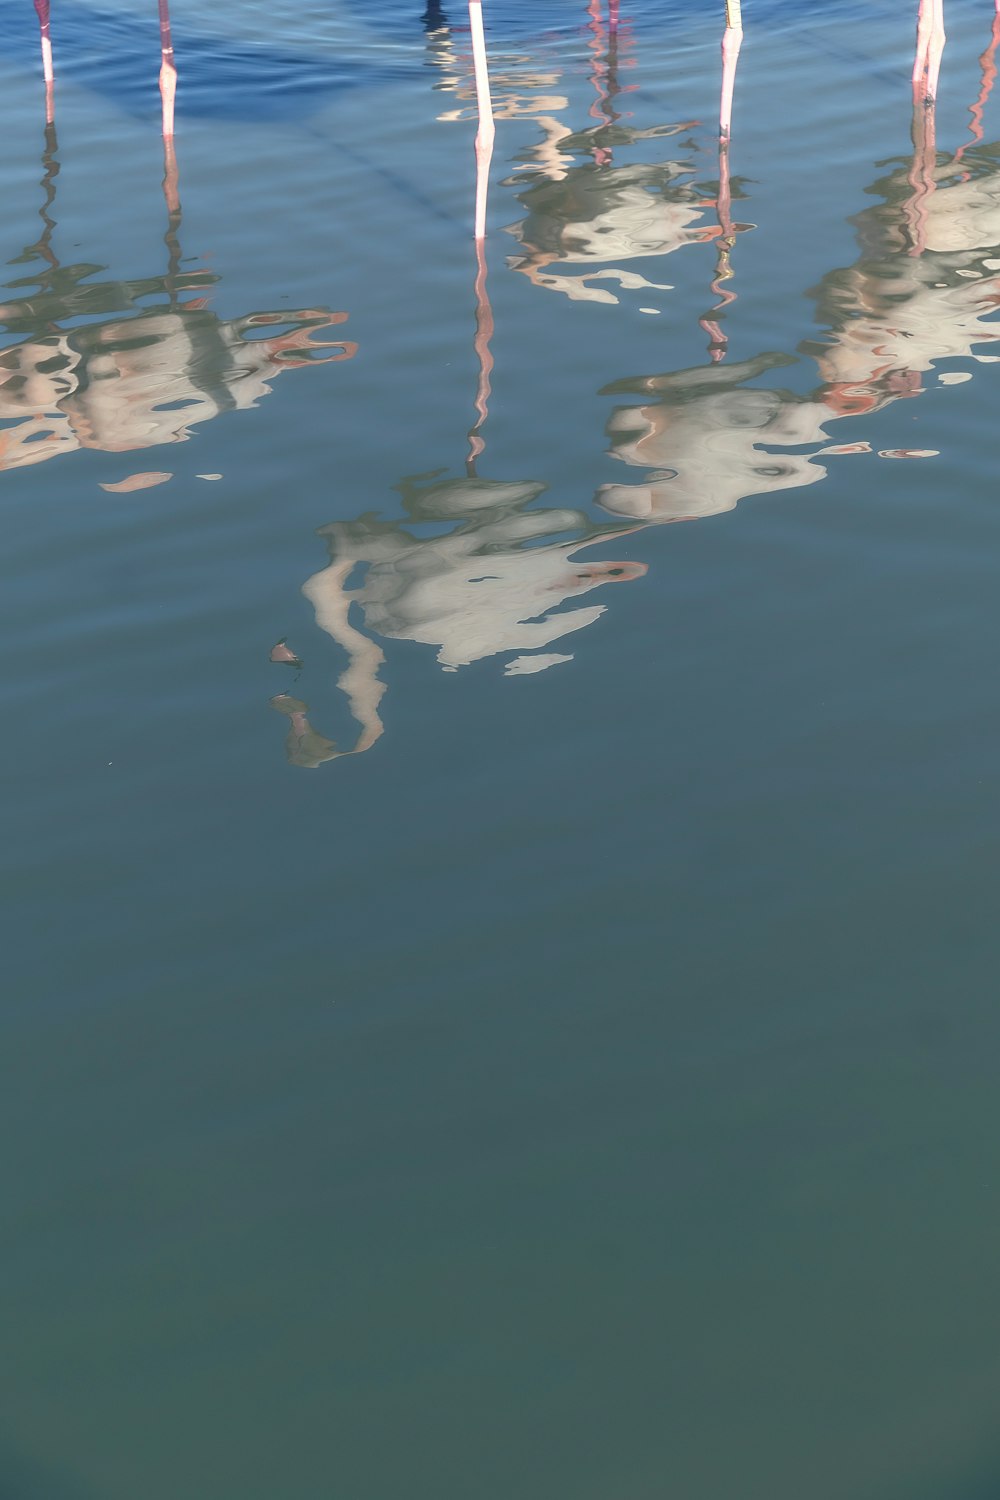 reflection of white birds on body of water during daytime